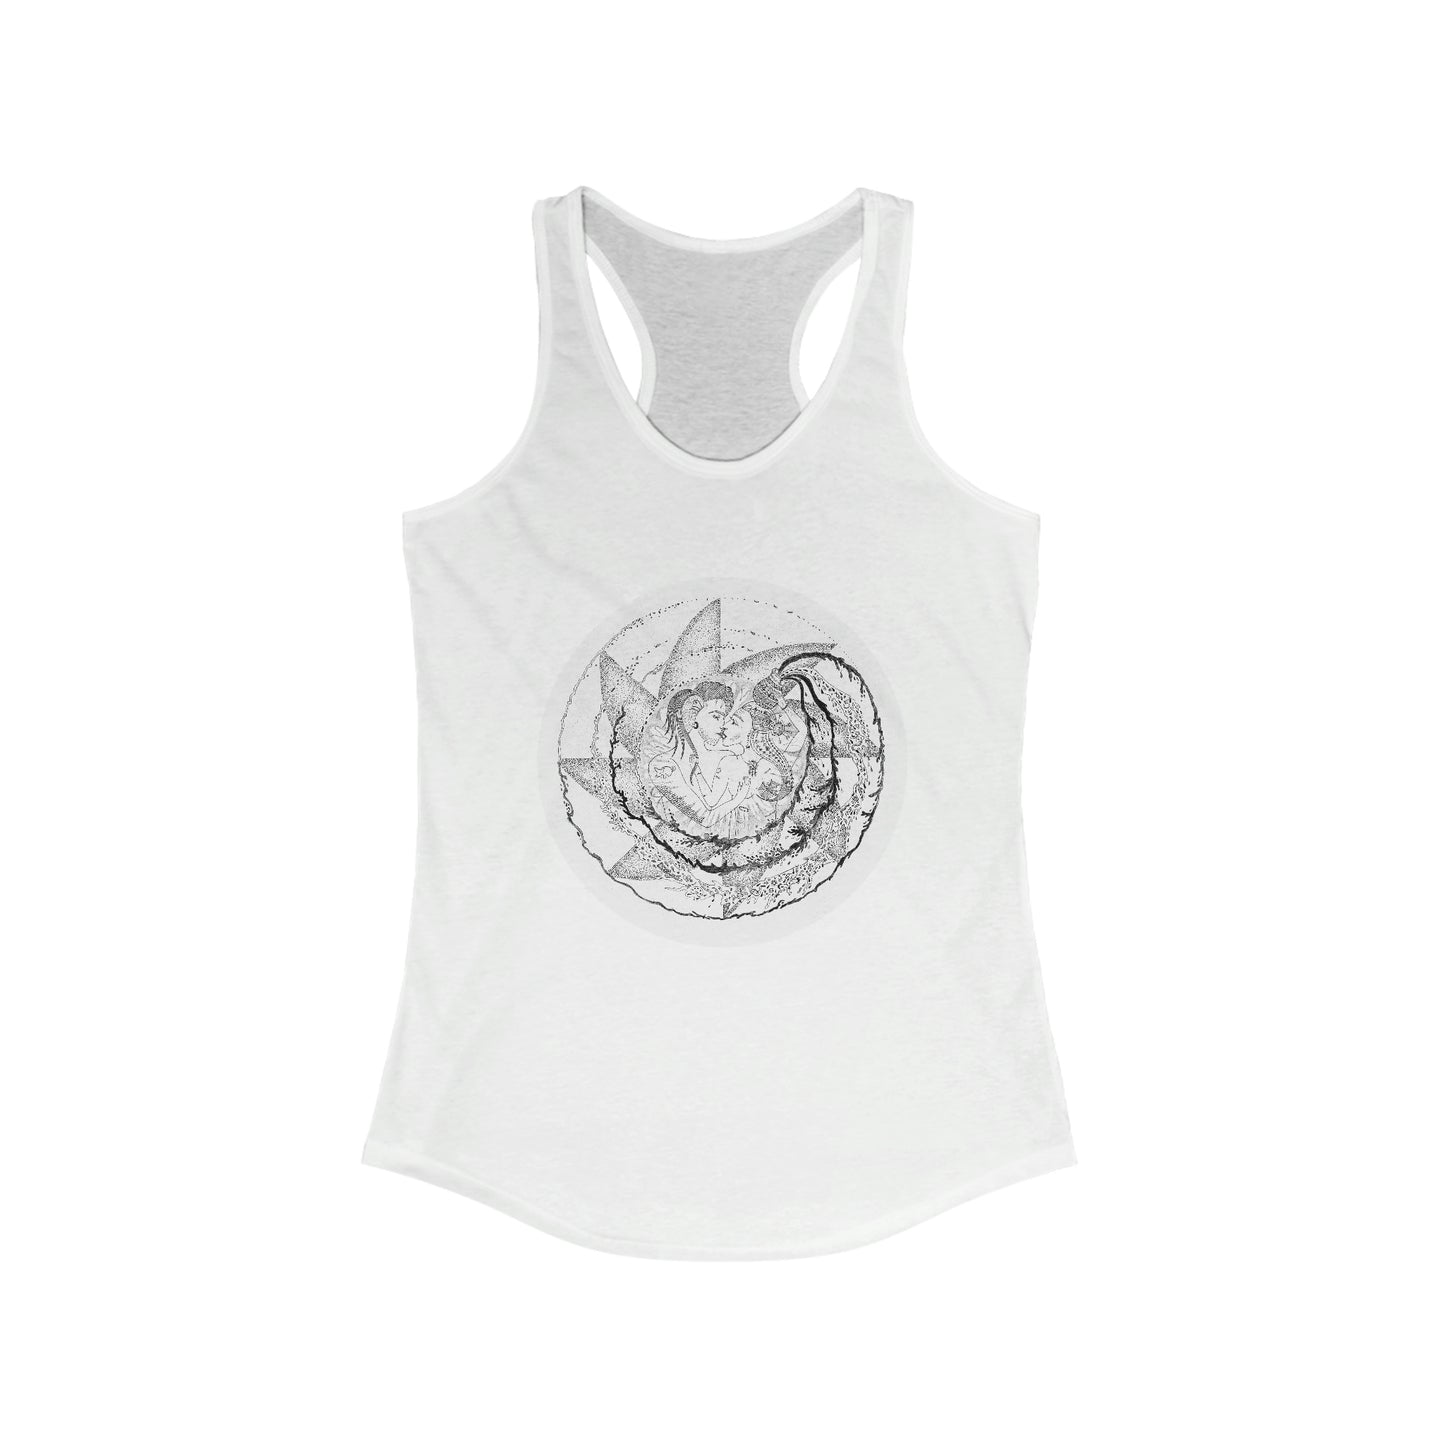 Chinese Zodiac Sign Tank Top (Pig) Limited Edition